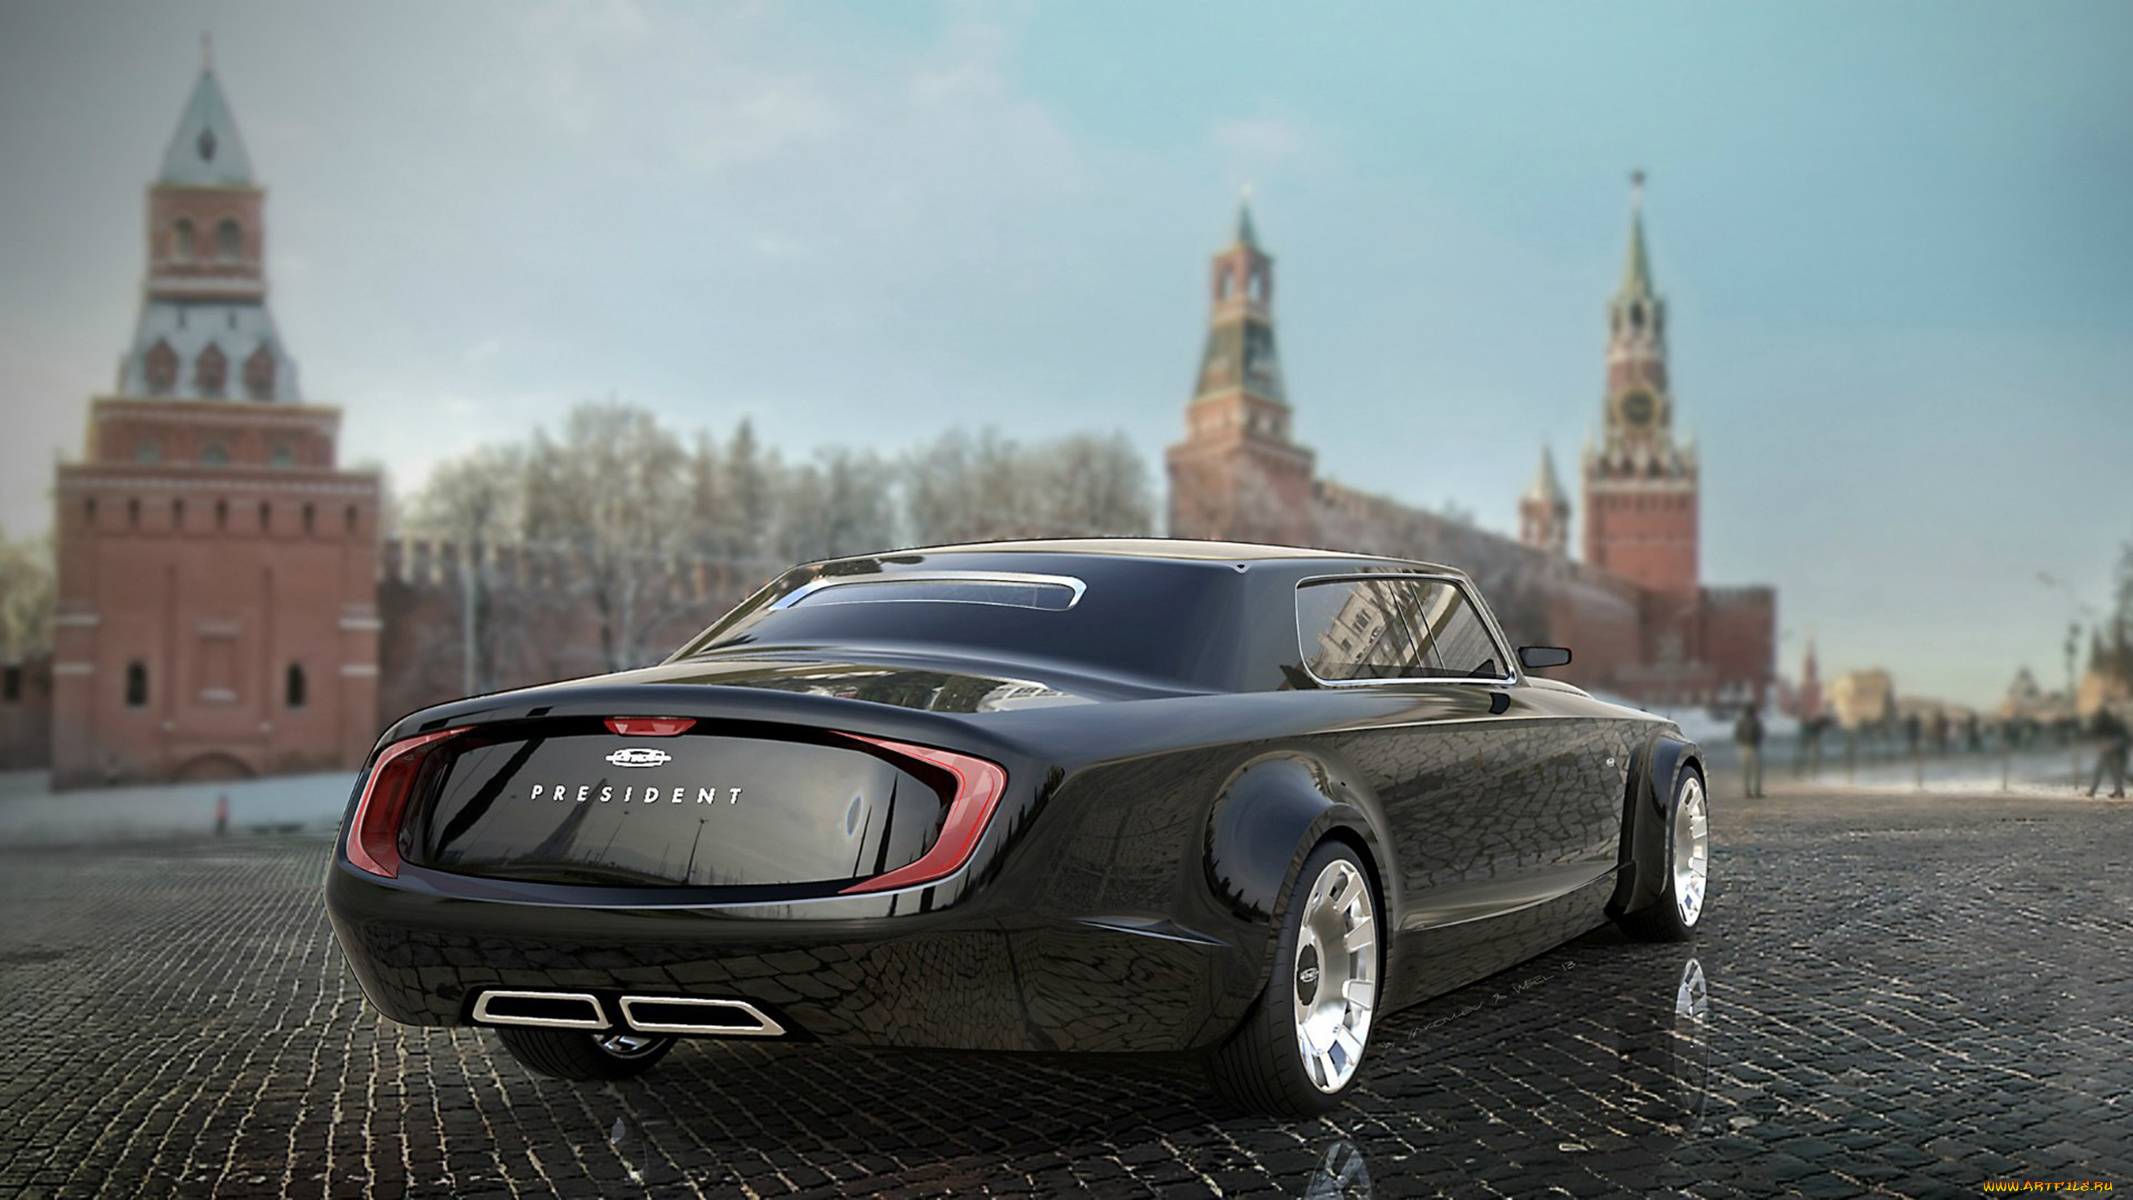 zil, presidential, limo, concept, автомобили, 3д, presidential, zil, 3d, concept, limo